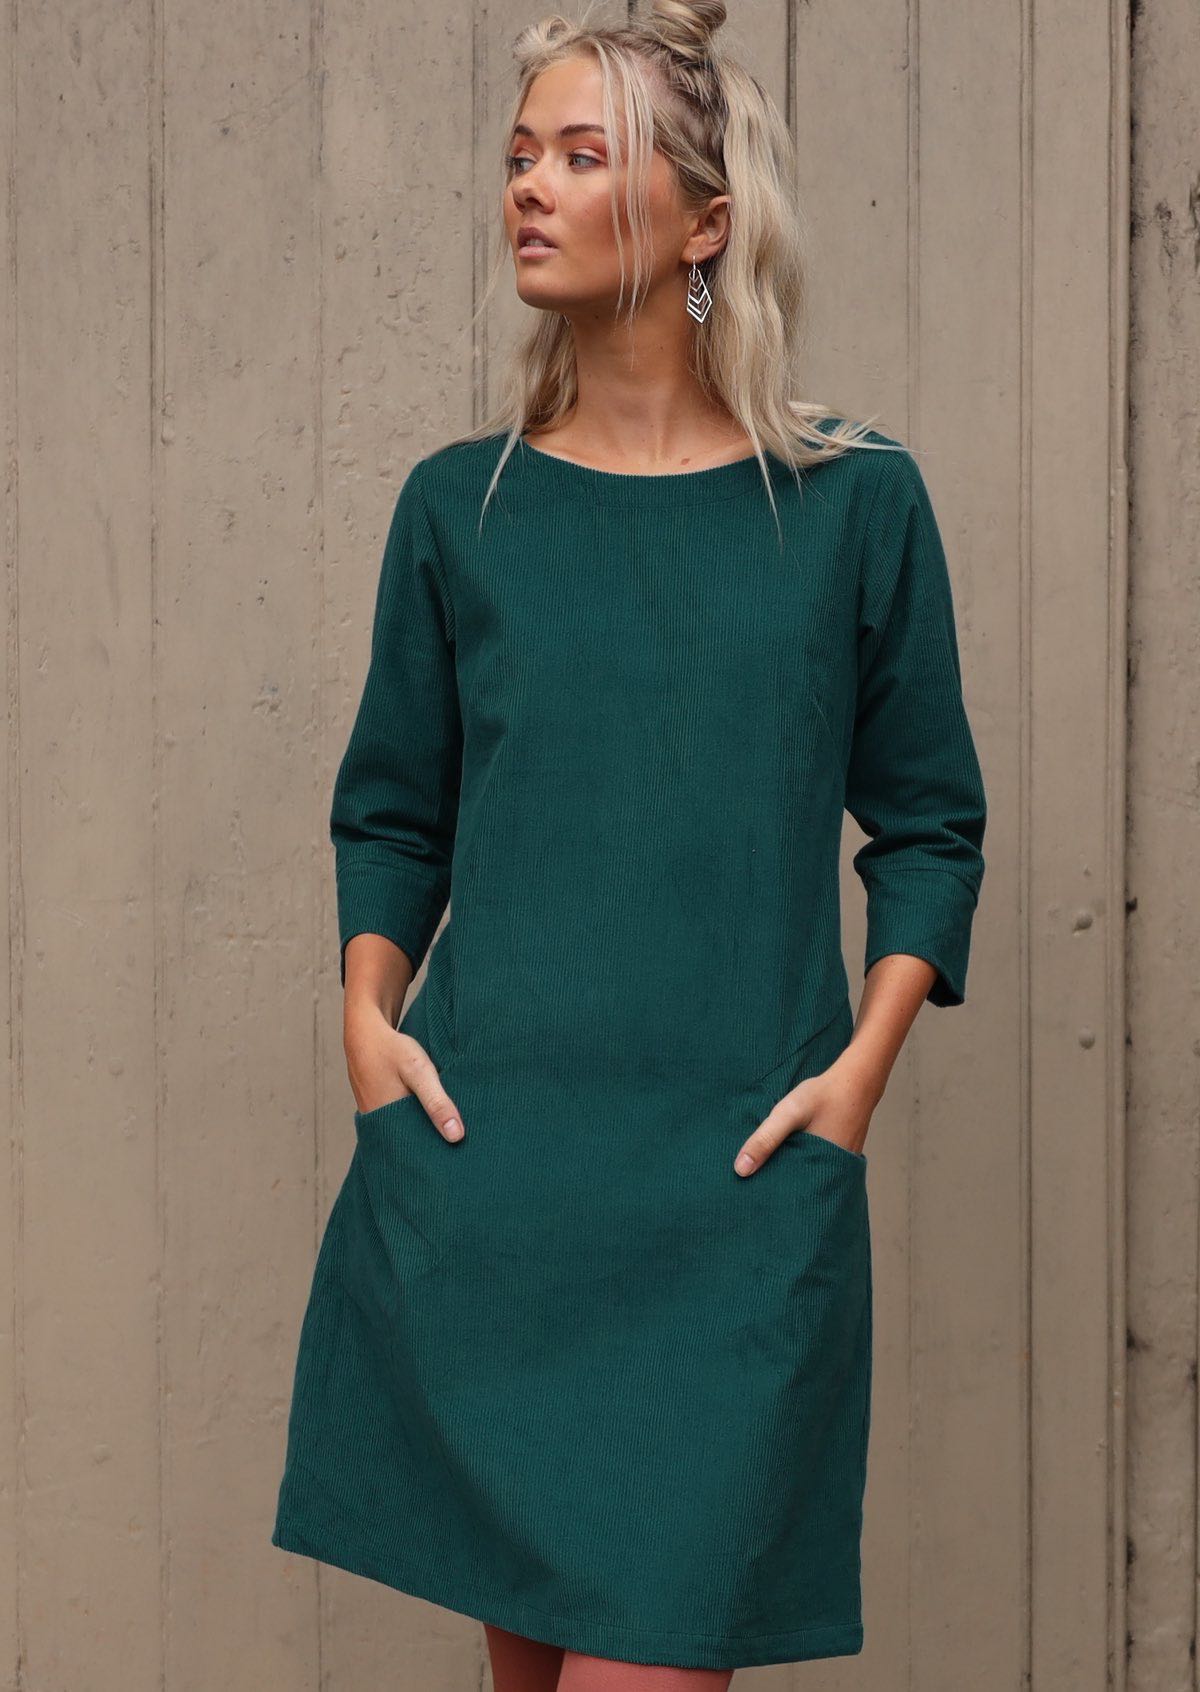 Rich teal cotton corduroy dress with pockets and wide neckline